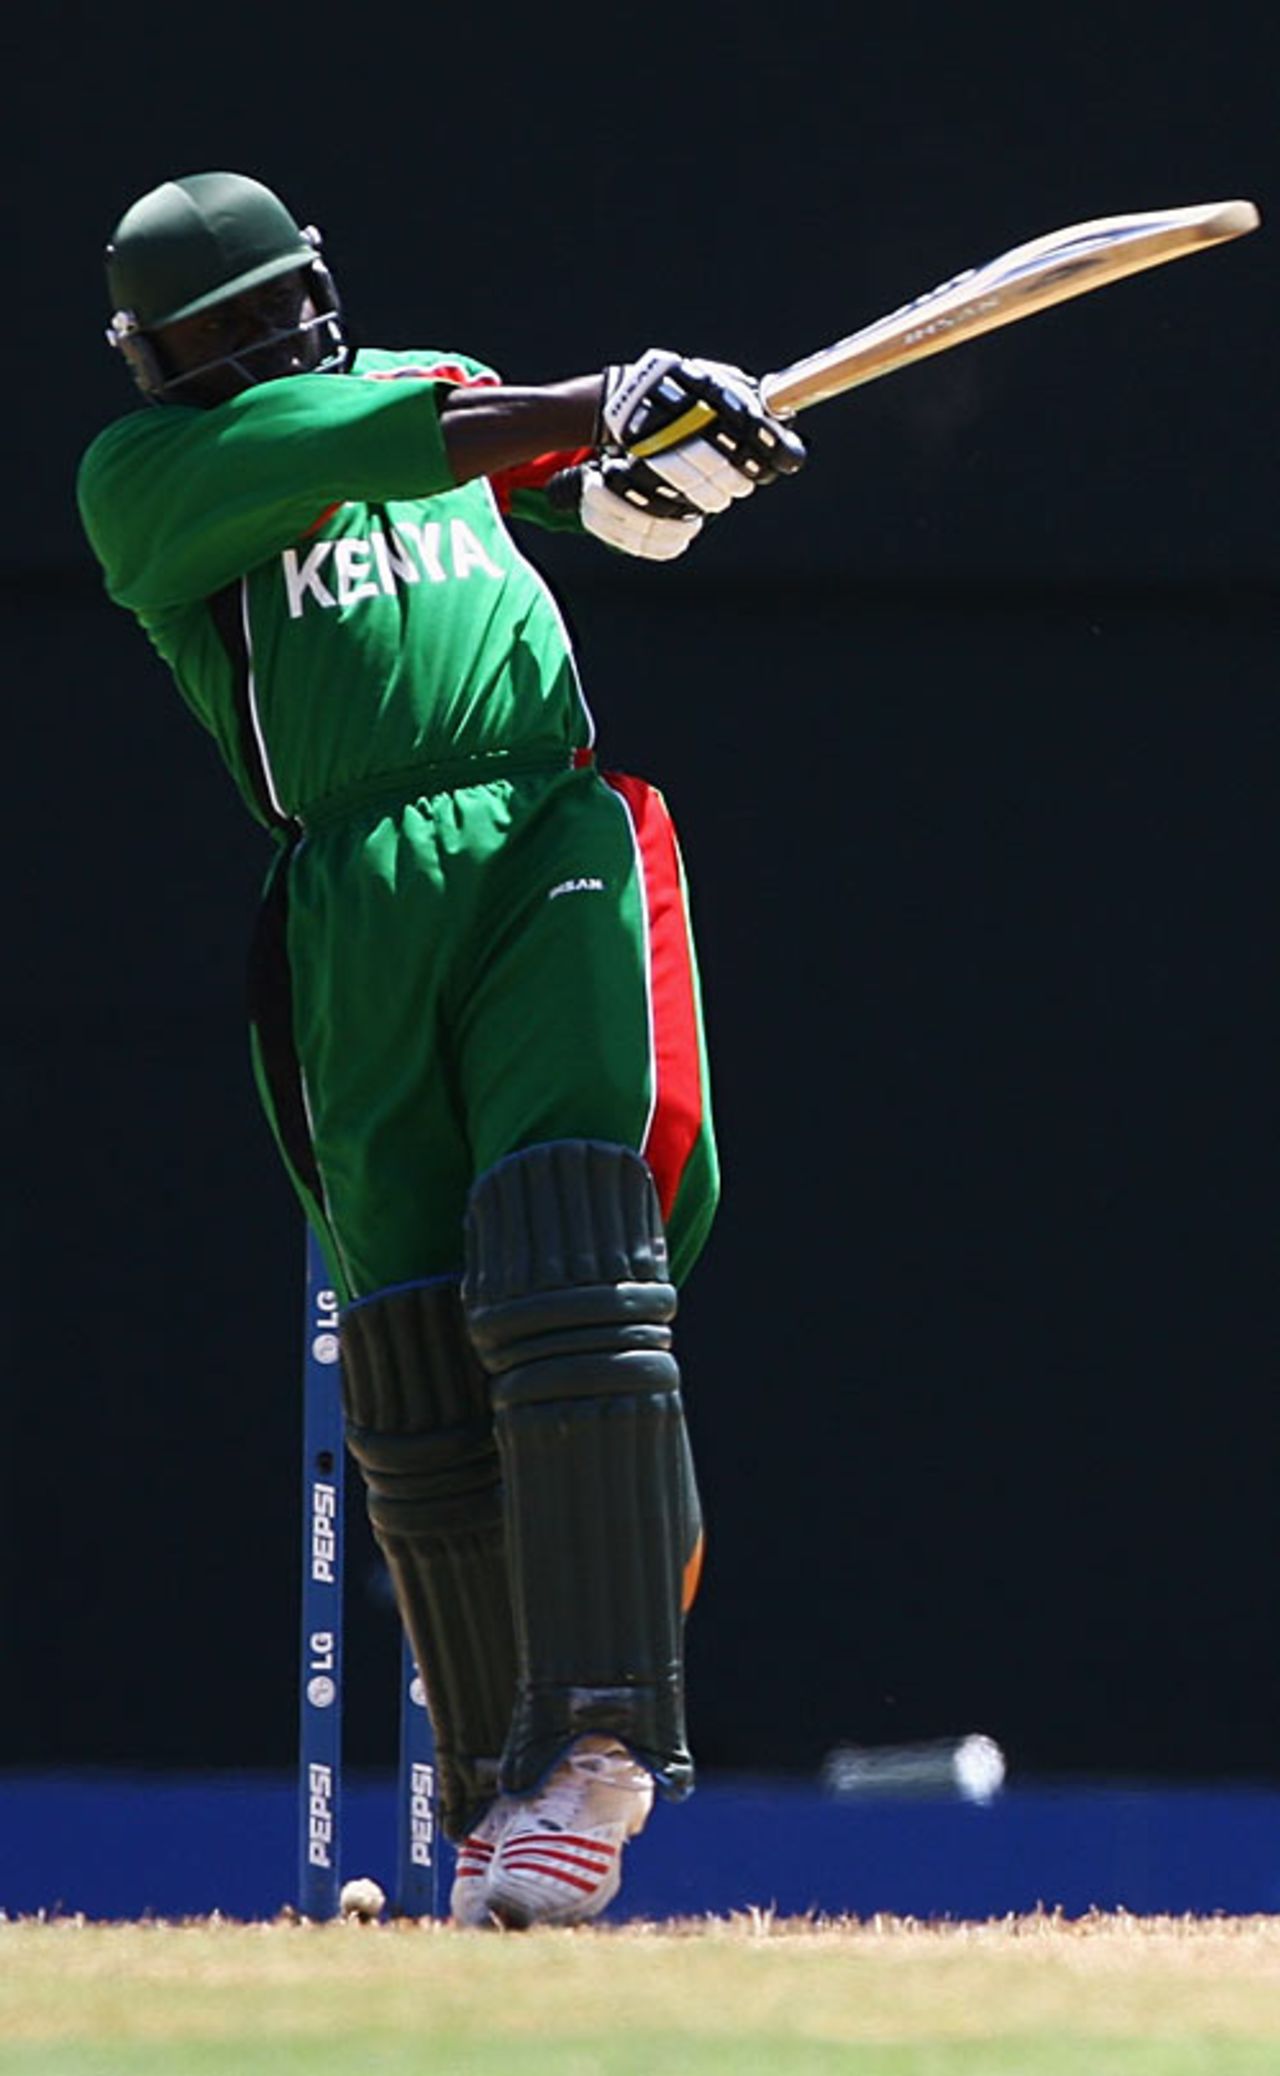 Steve Tikolo goes on the pull during his fifty, England v Kenya, Group C, St Lucia, March 24, 2007